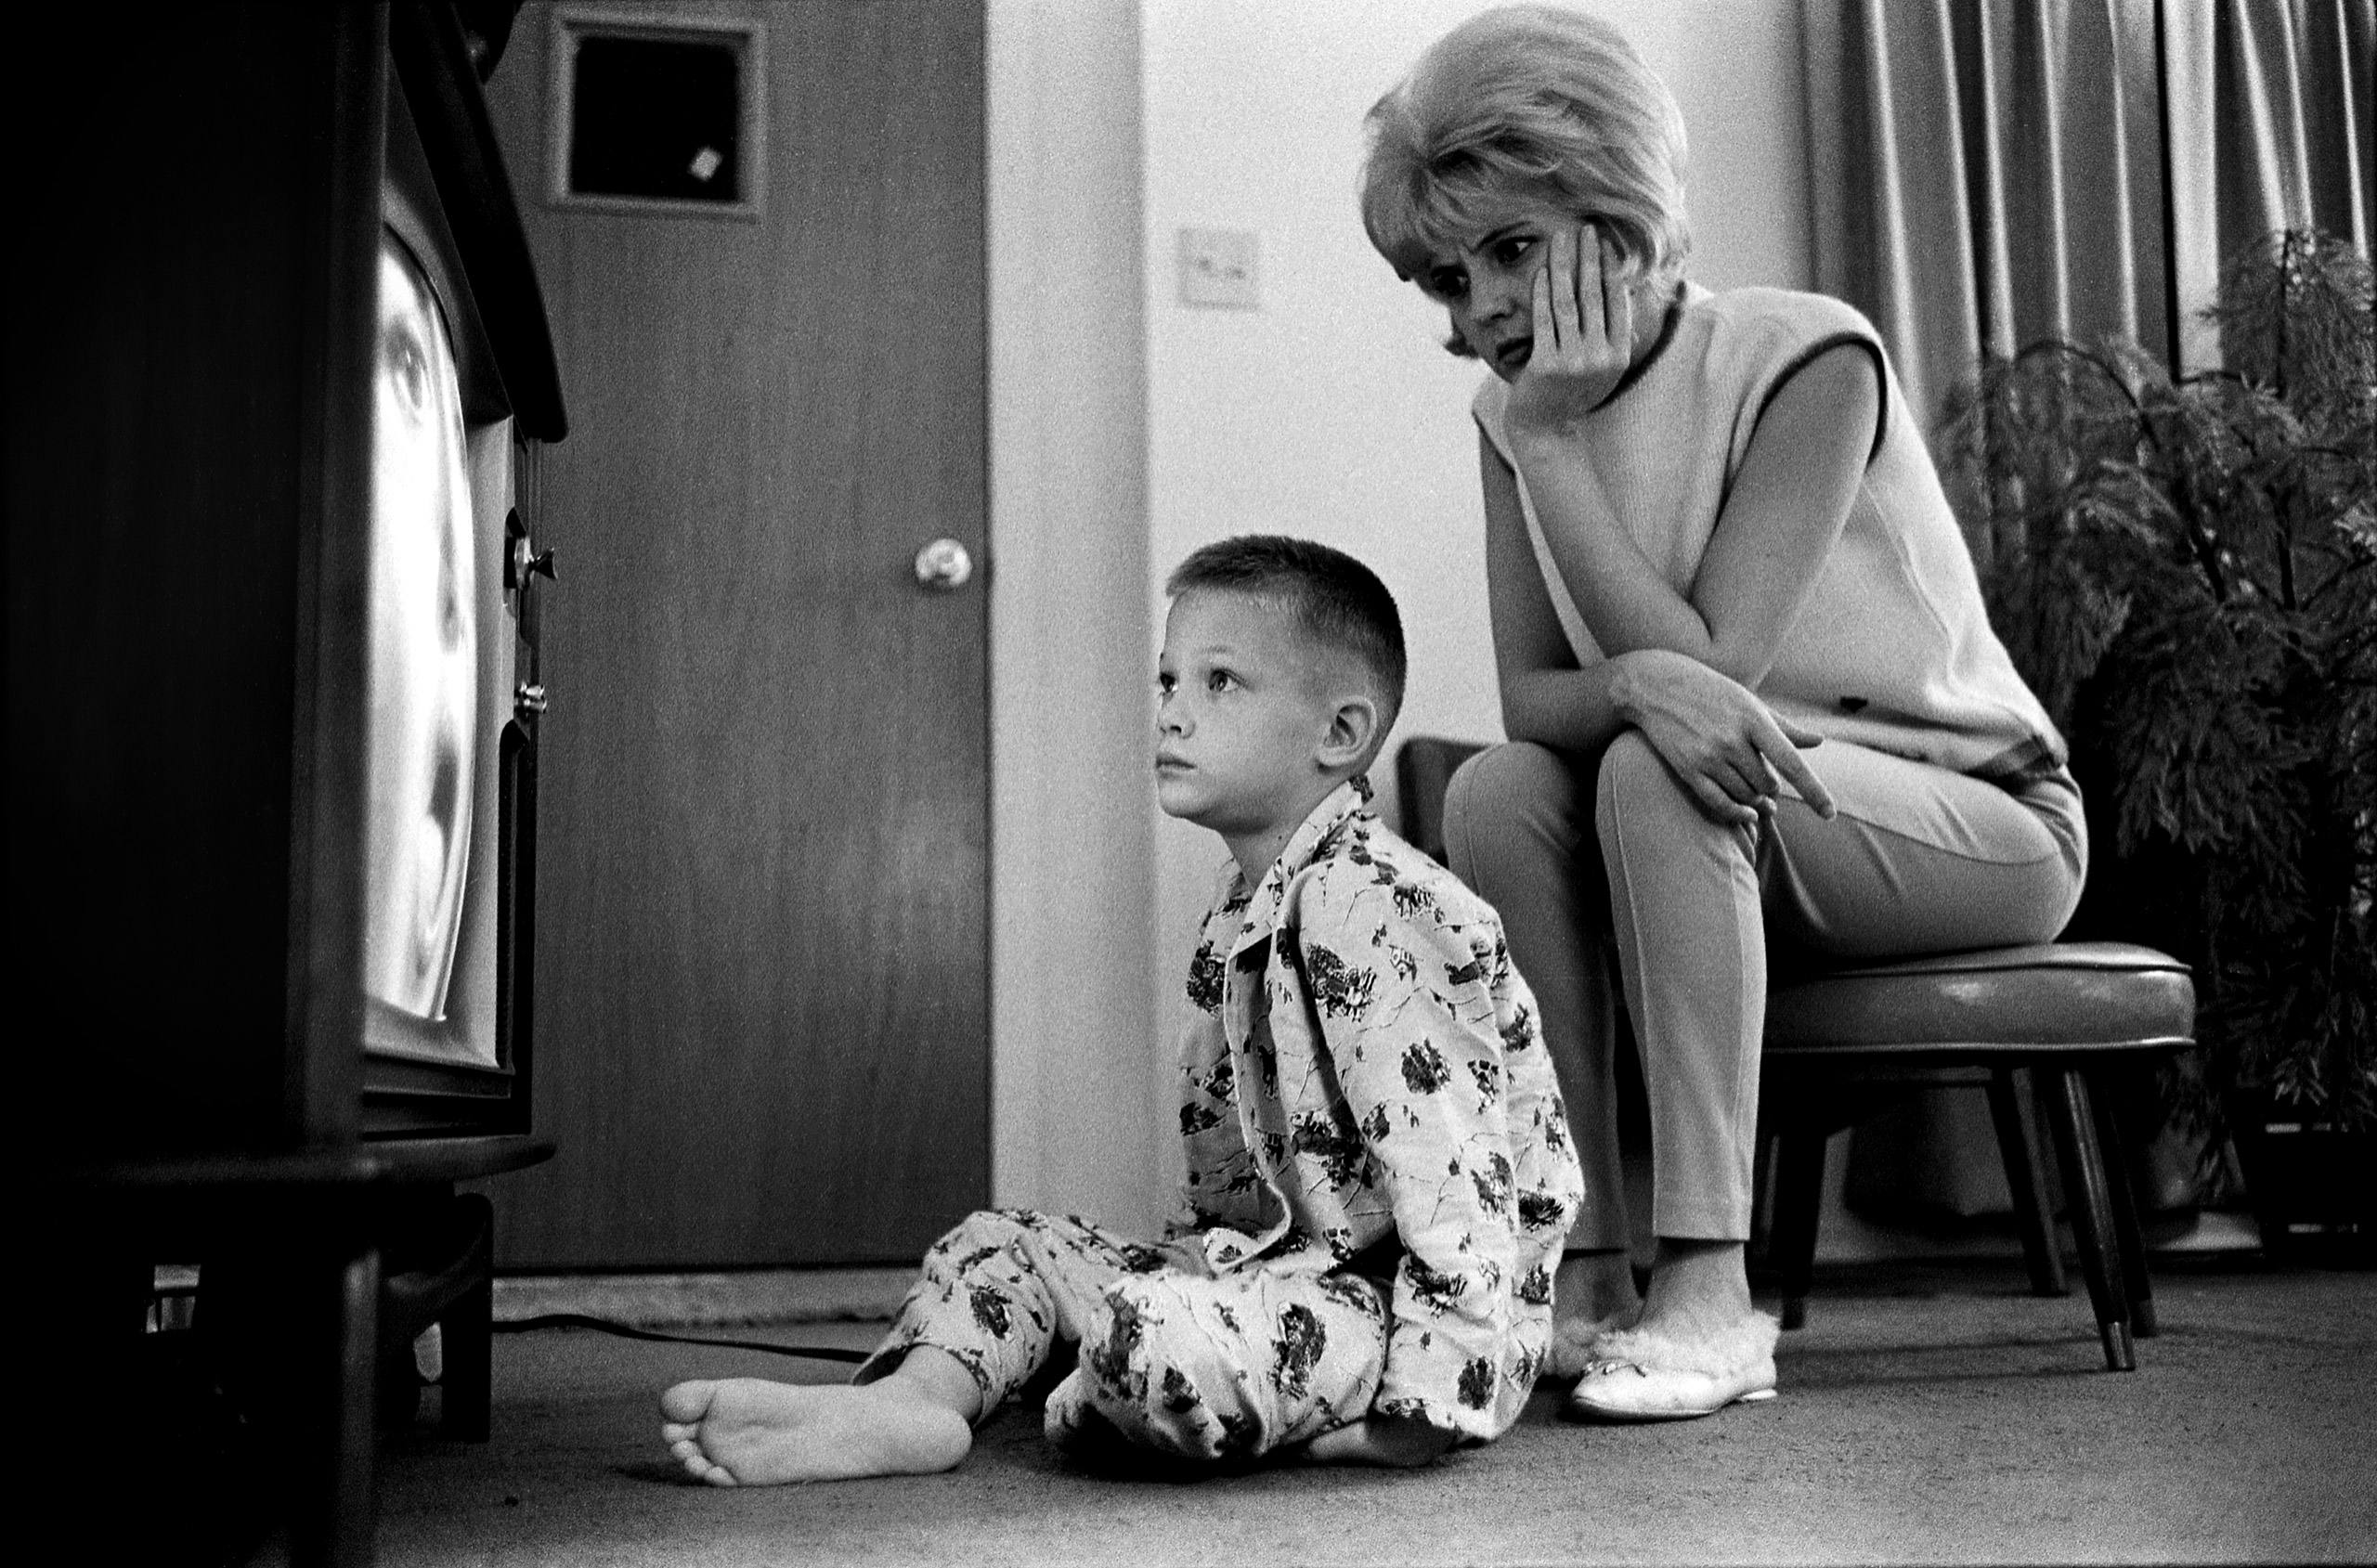 Single mother Vi Erker watching television with her son Gary, 1965. Published in  The Long, Lonely Wait of a Young Divorcee  LOOK 30:1 (Jan. 11, 1966)